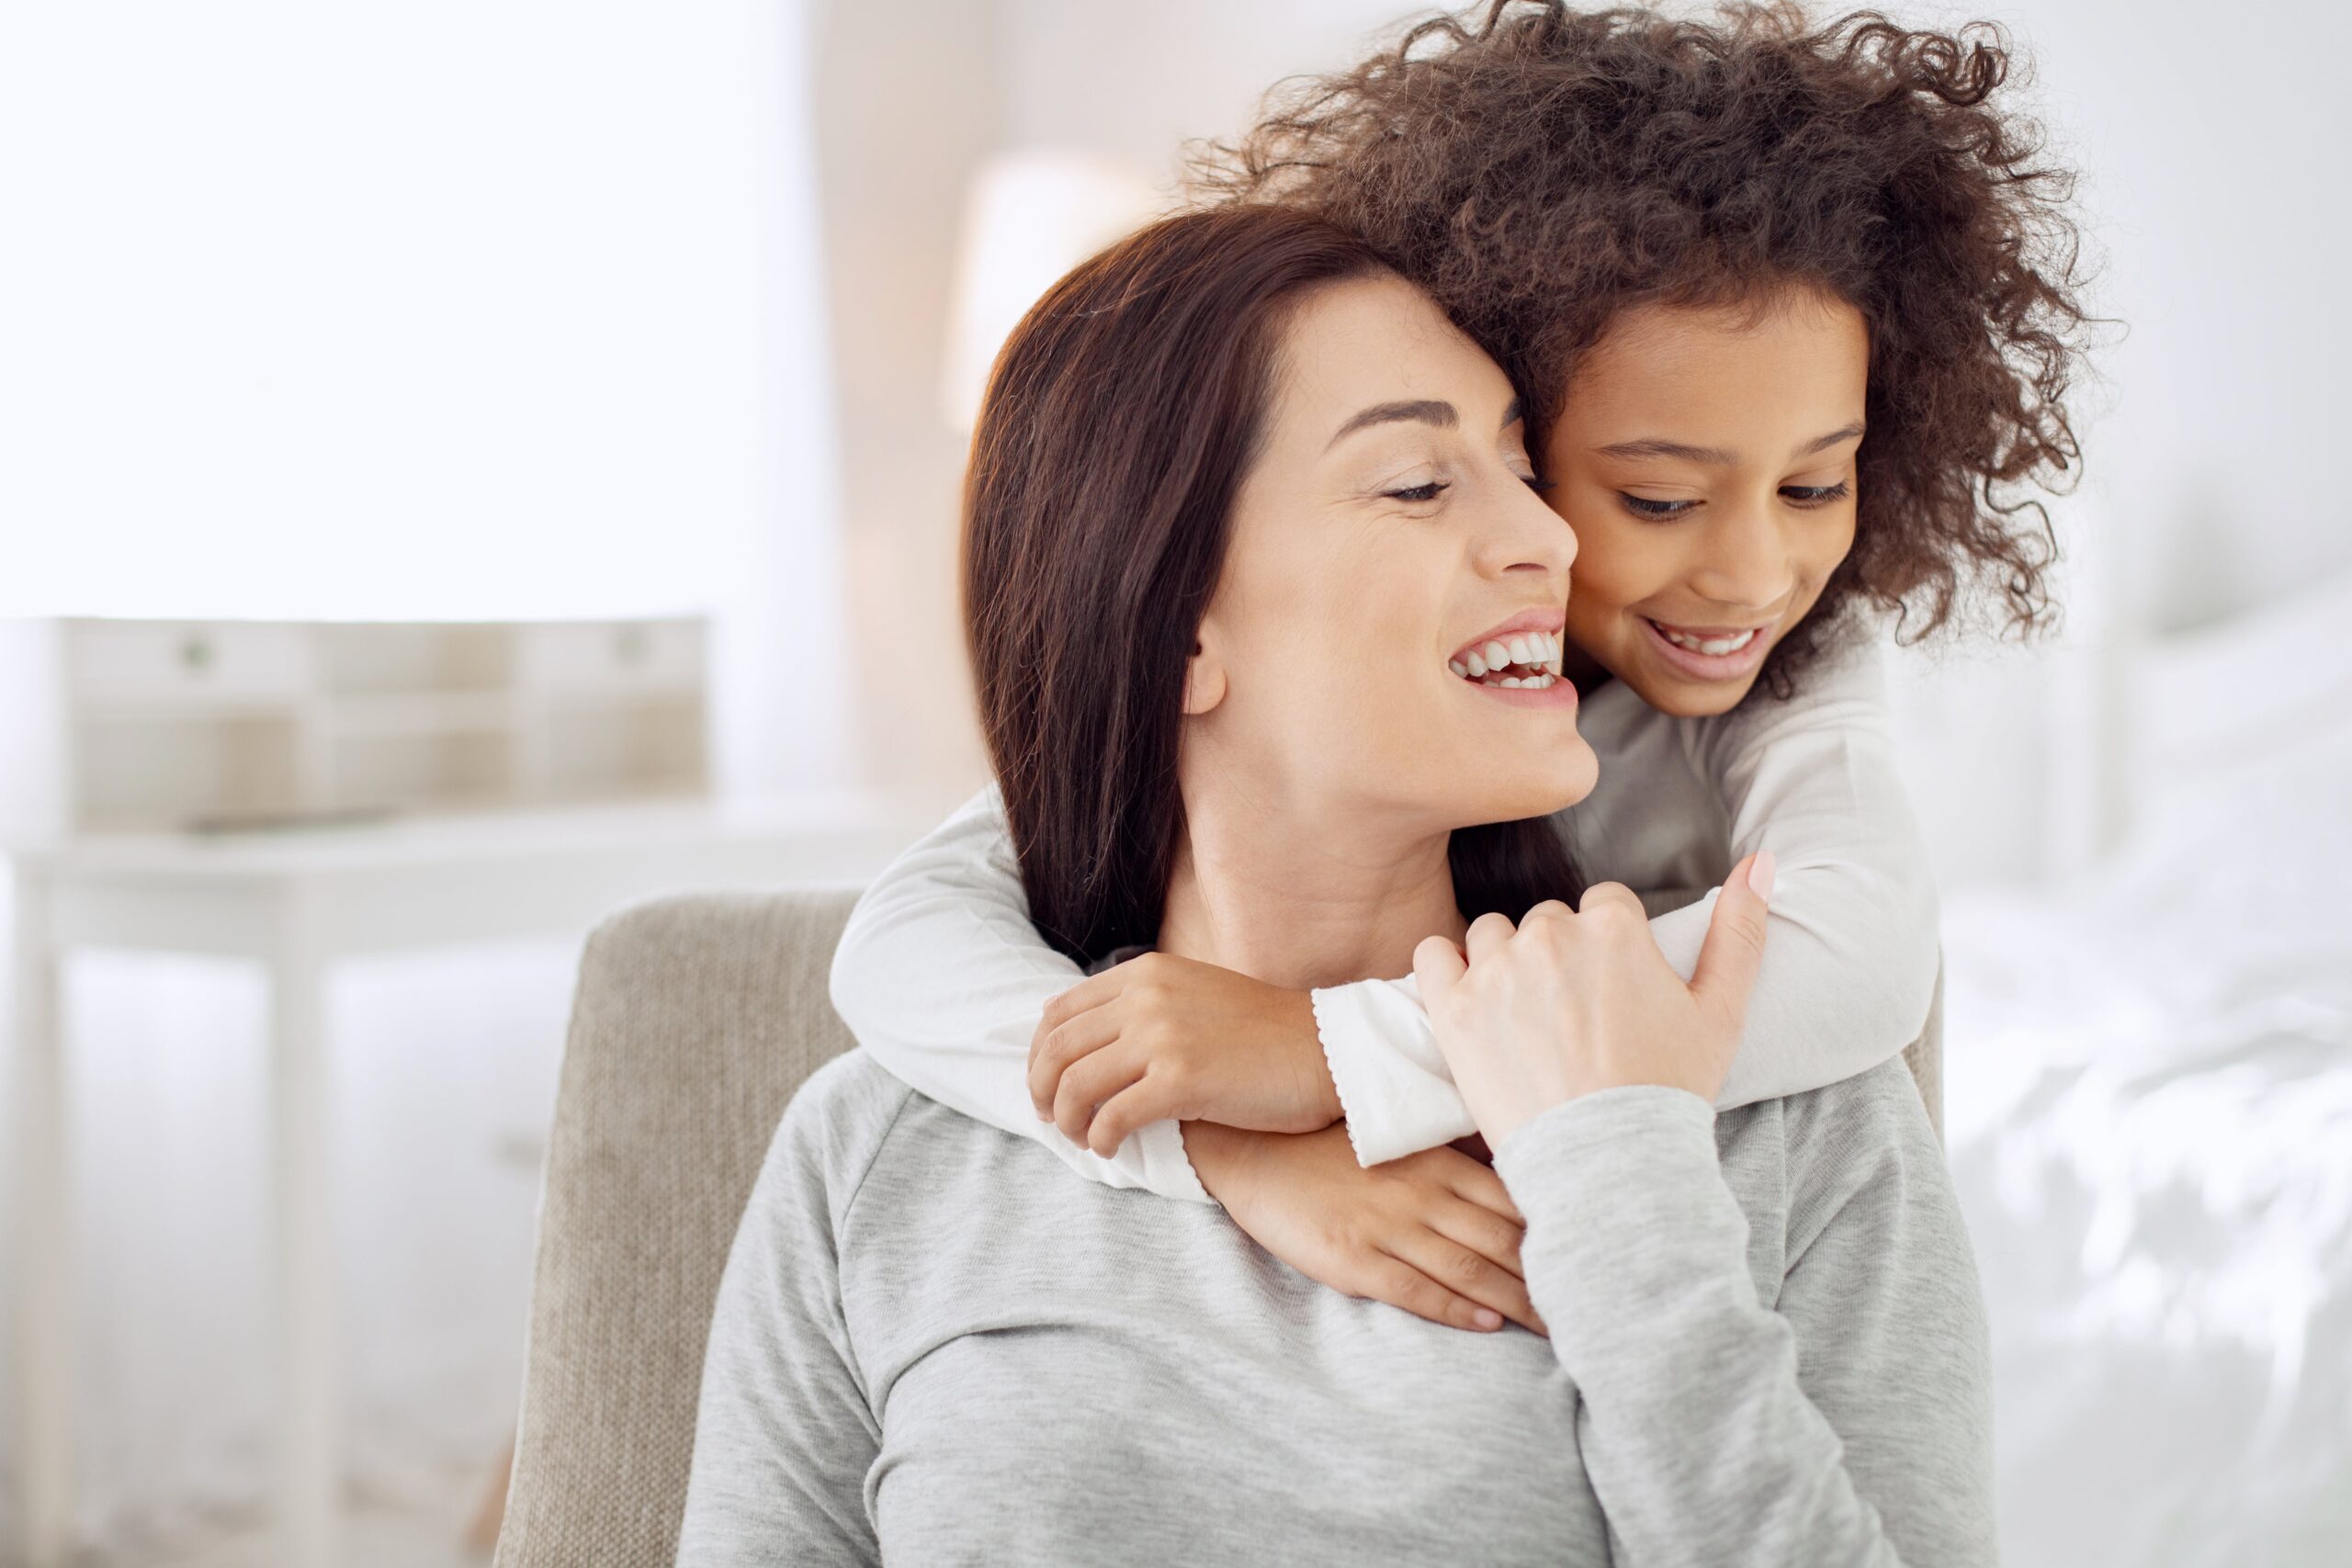 Woman sits on chair with a happy child’s arms around her. Get in touch with our skilled Boise guardianship lawyer to help you through the complex journey of gaining guardianship.